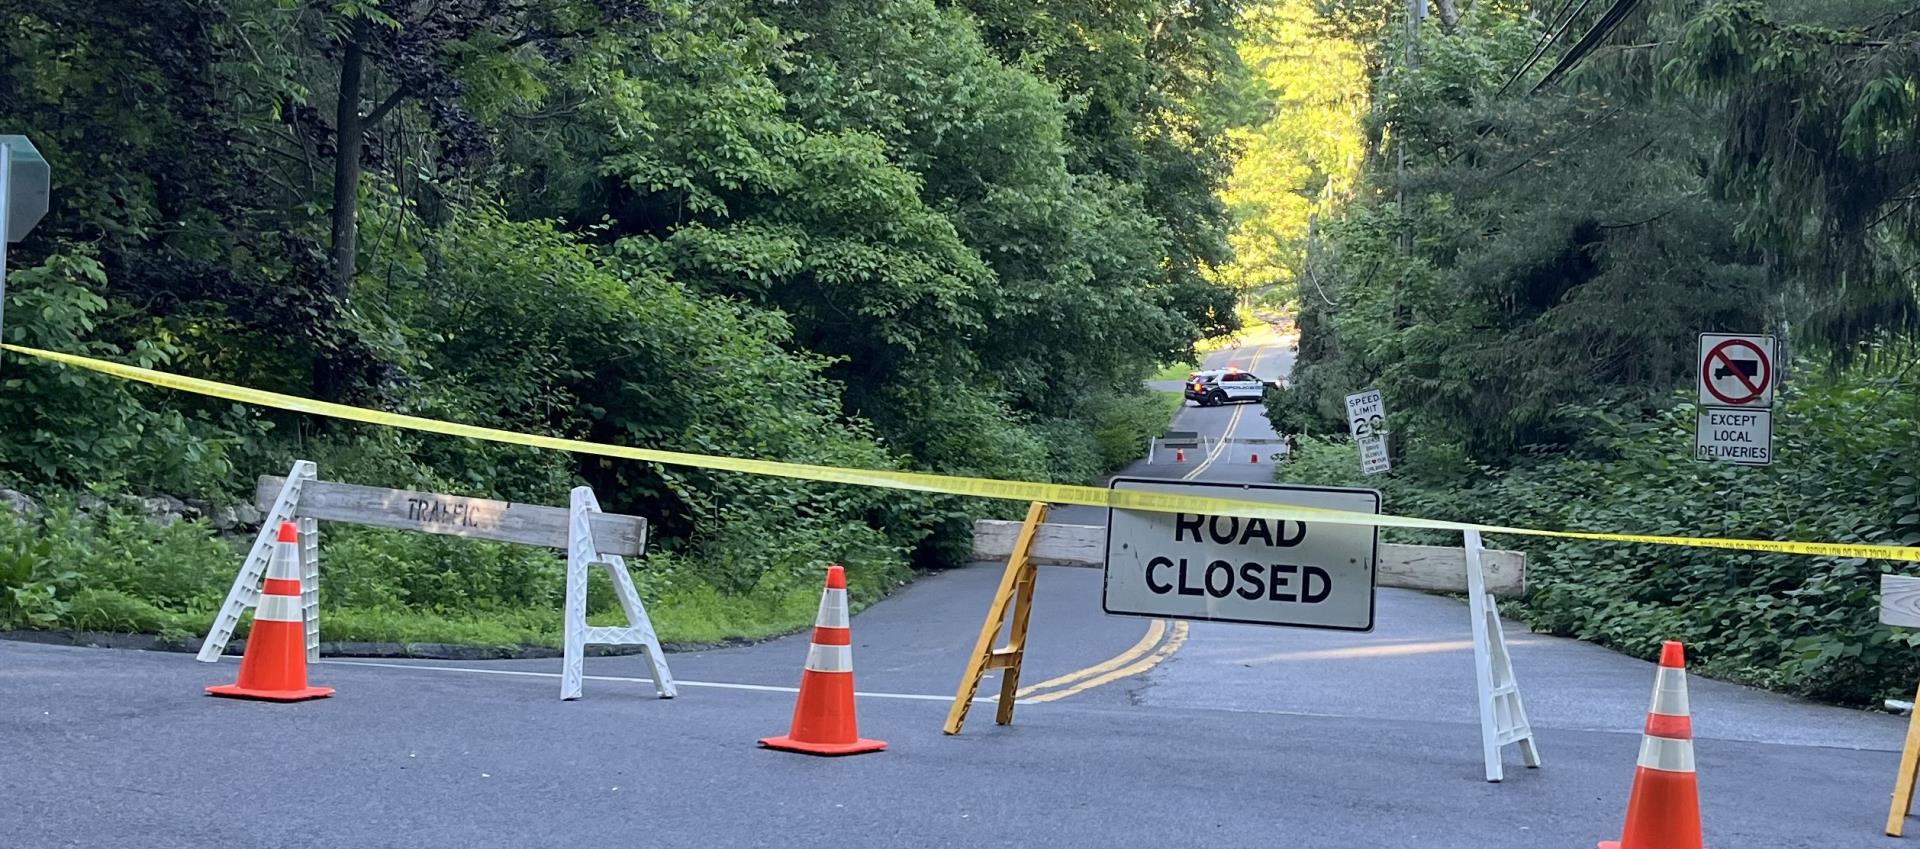 A picture of Mill Road Bridge closed with caution tape and cones in front of the bridge